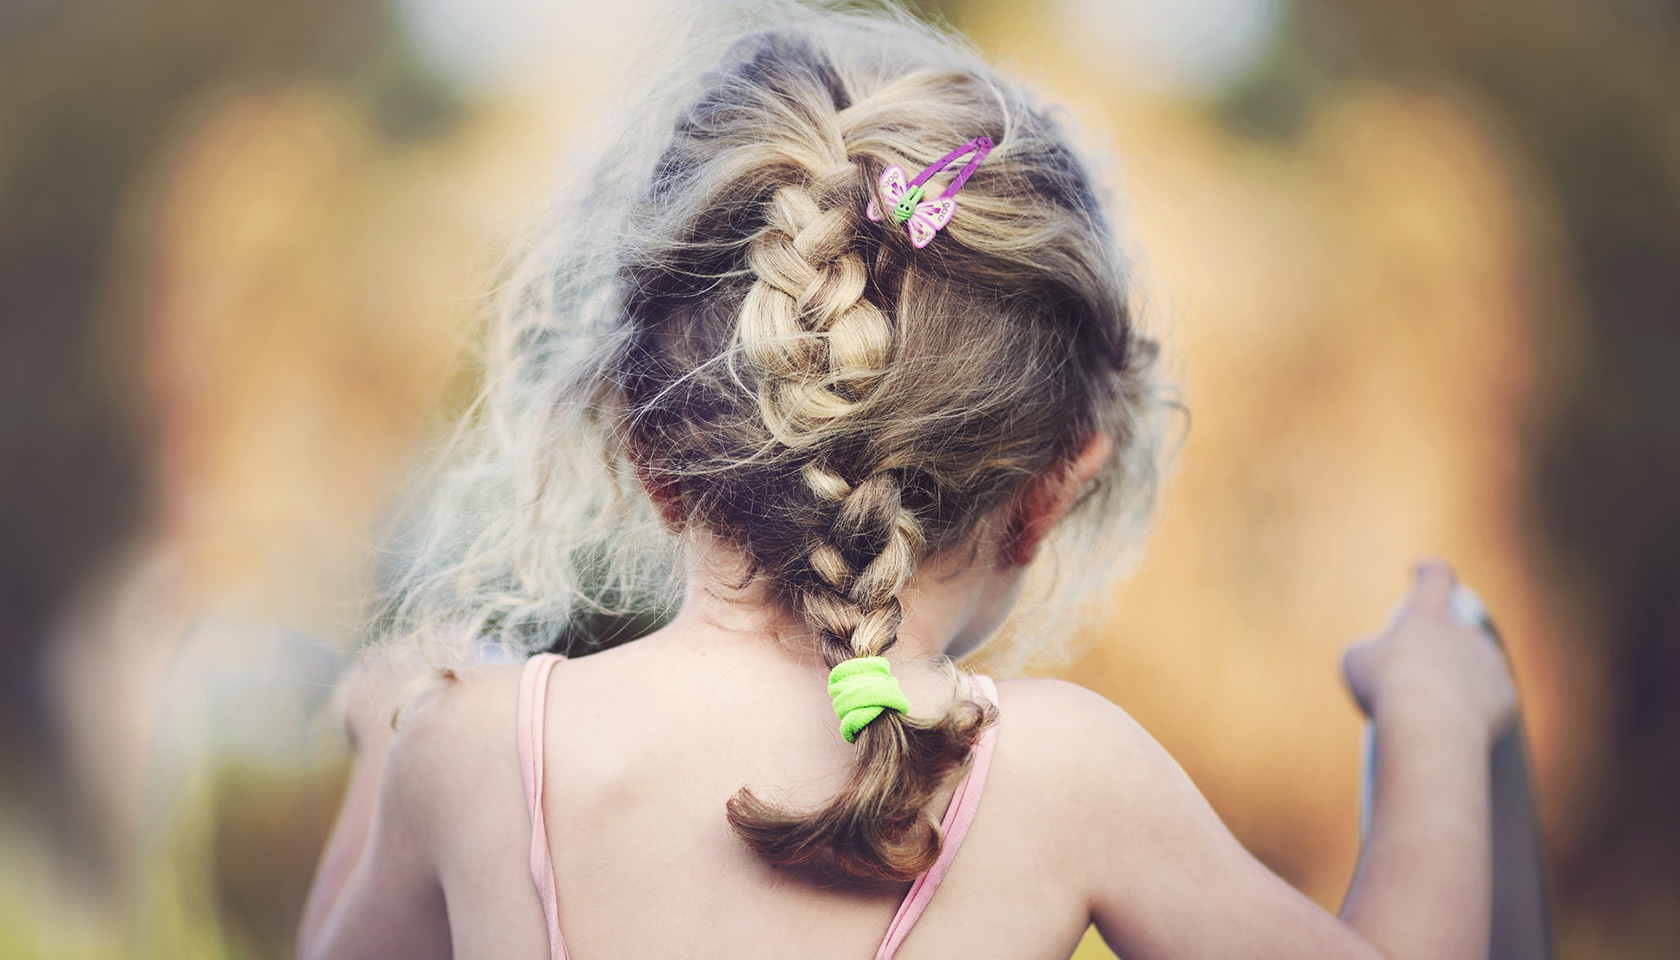 How can I prevent lice?